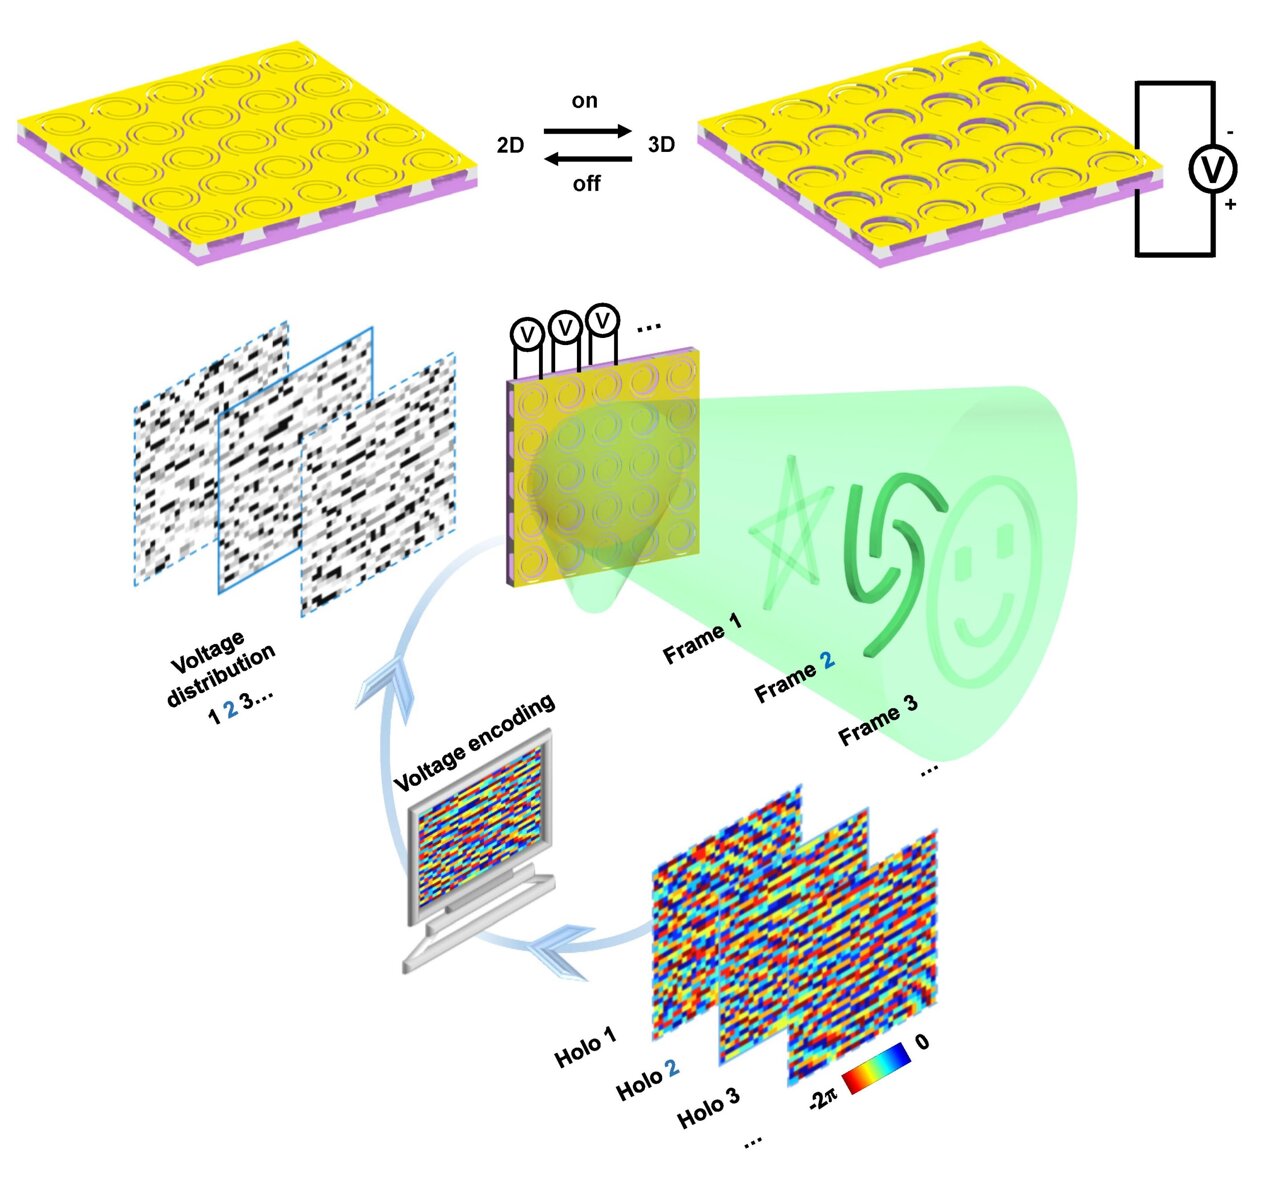 Researchers designed reconfigurable metasurfaces with 2D spirals